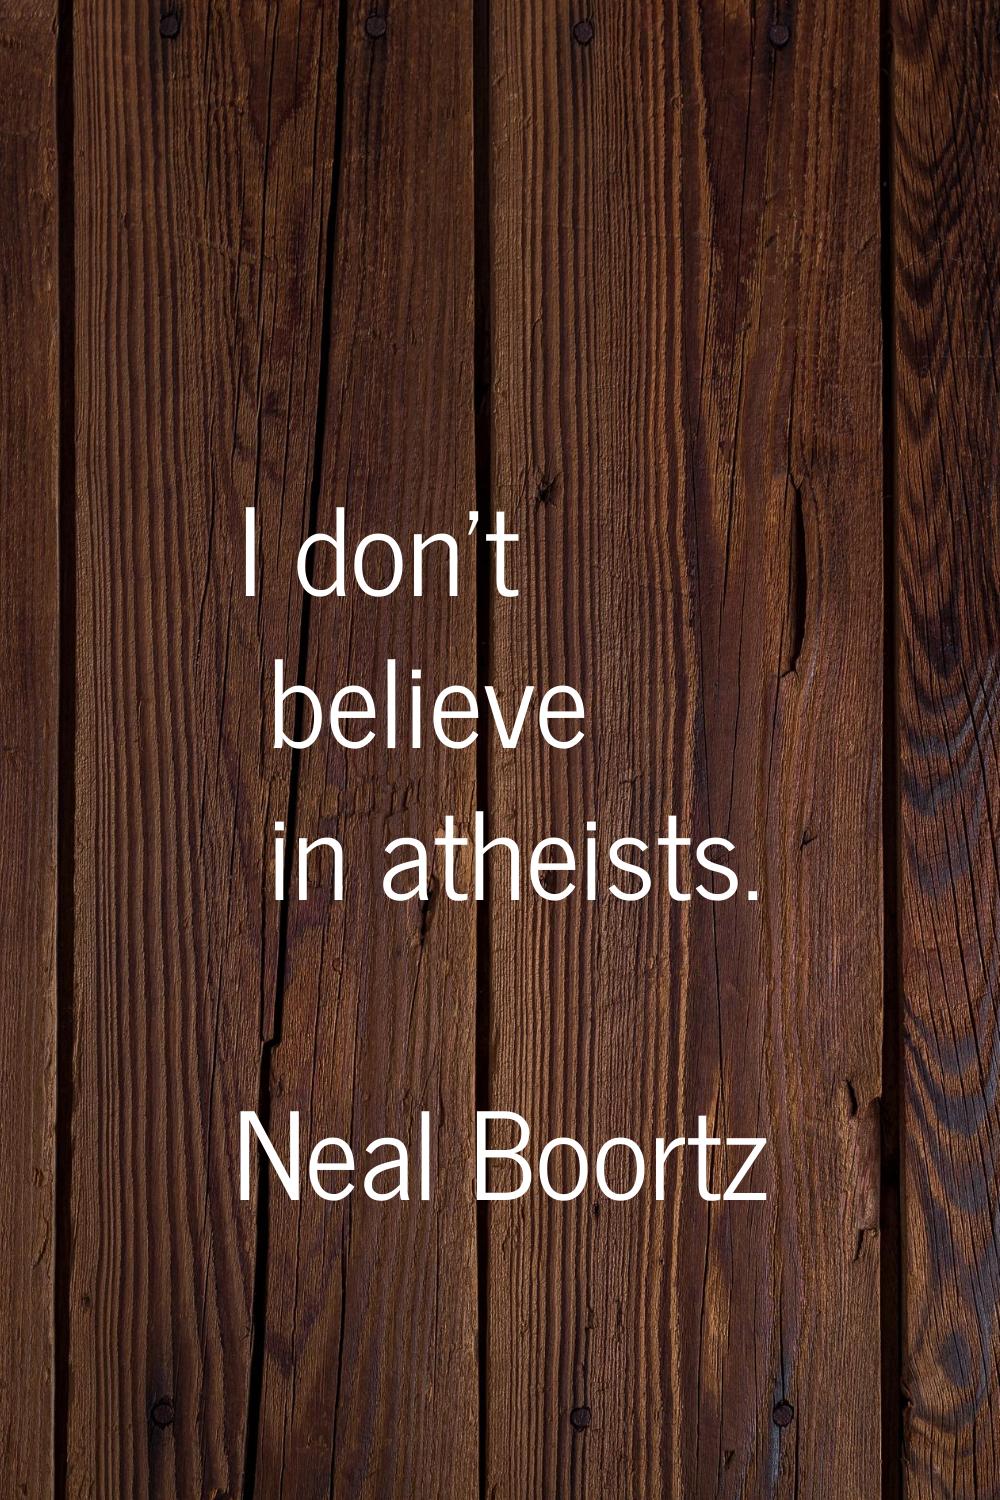 I don't believe in atheists.